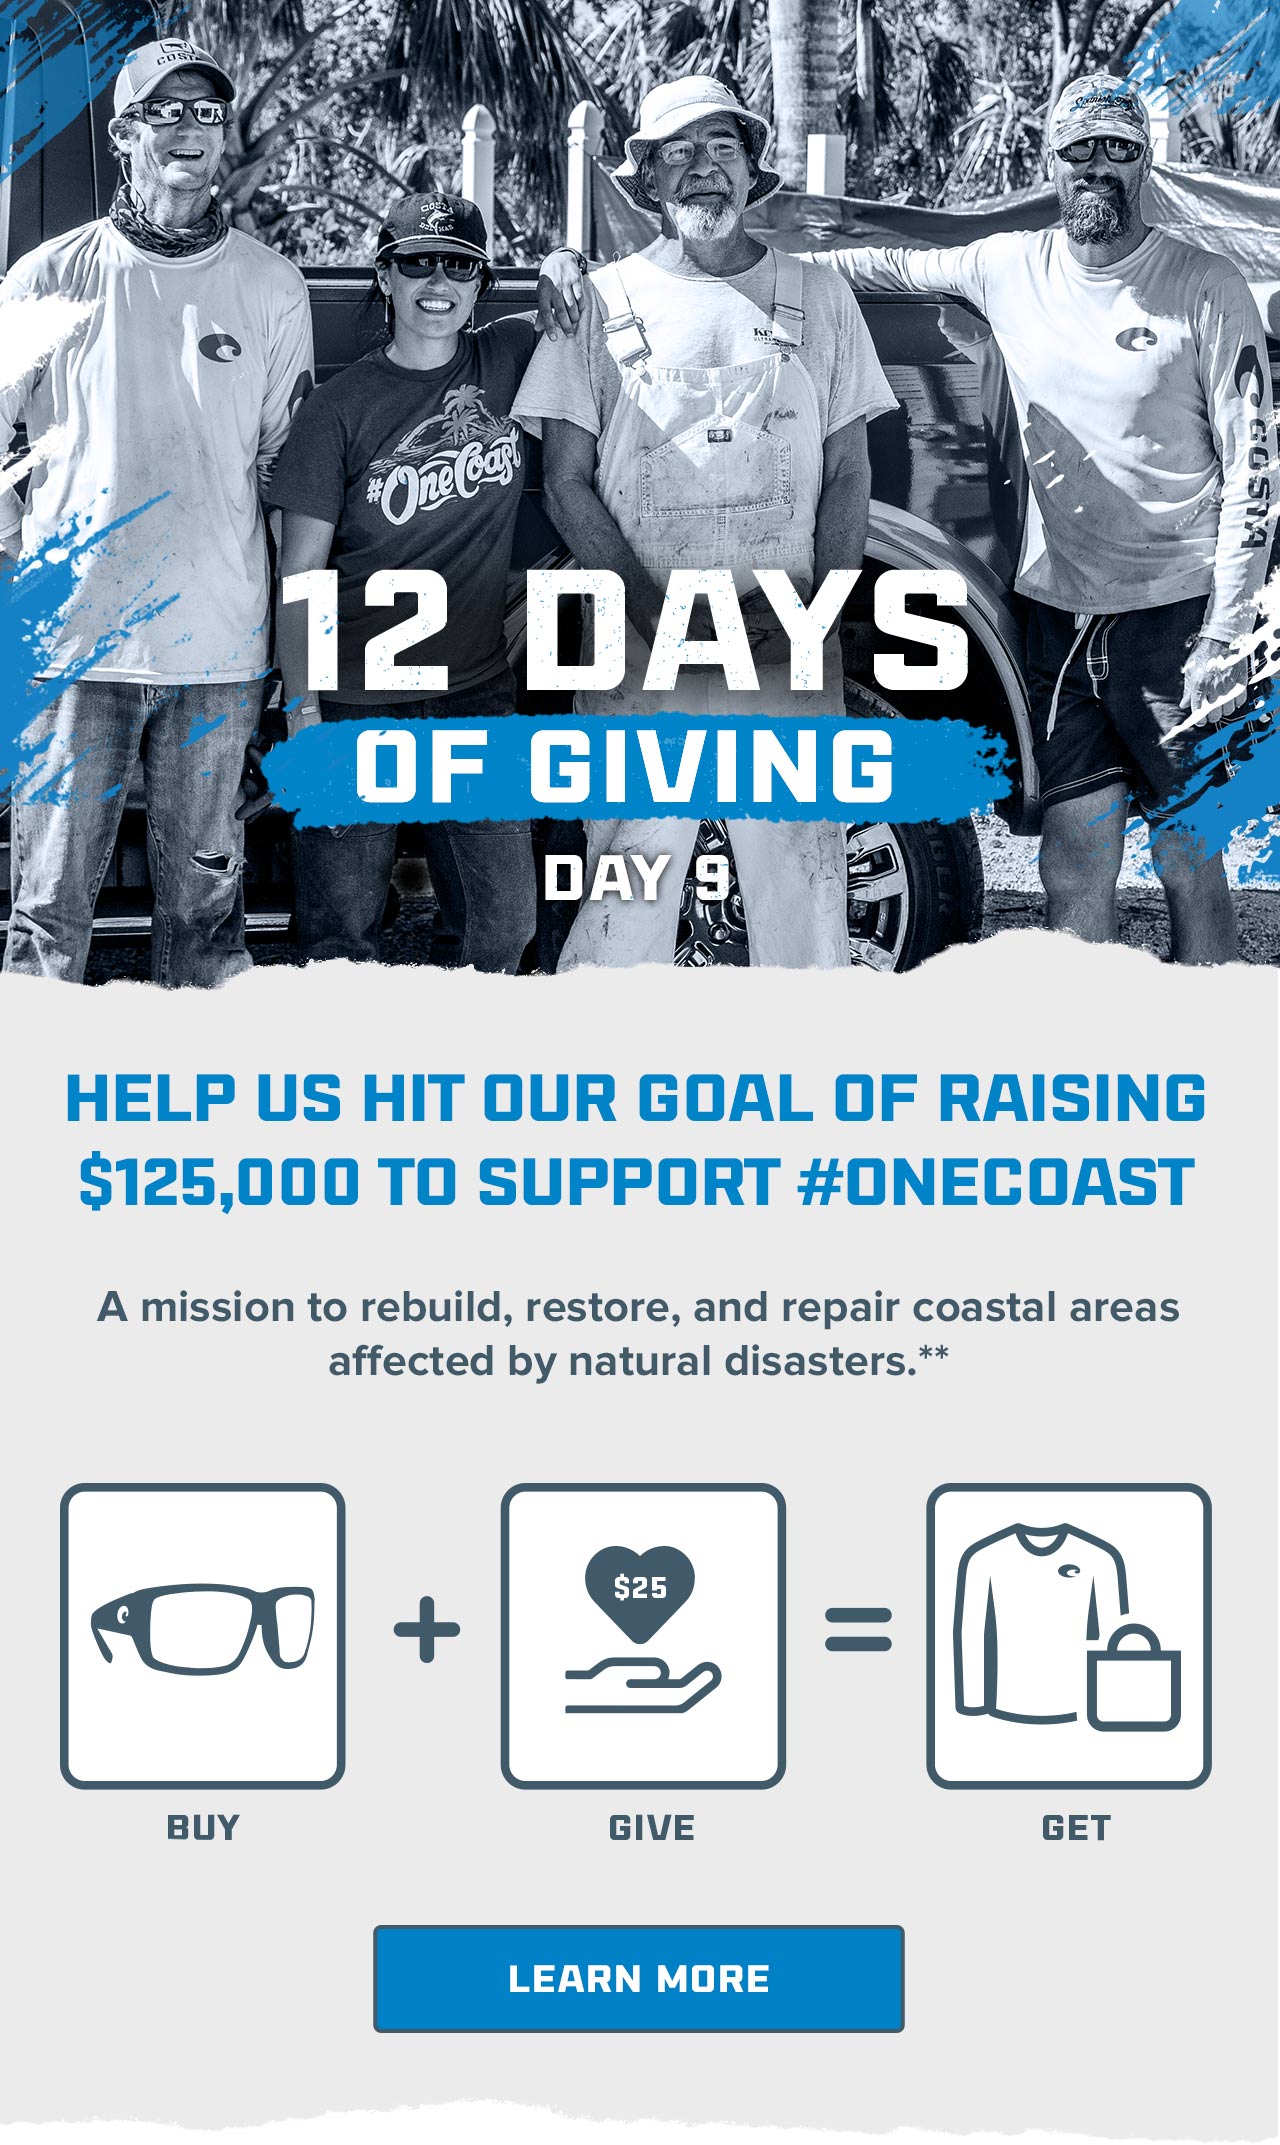 12 Days of Giving - Day 9